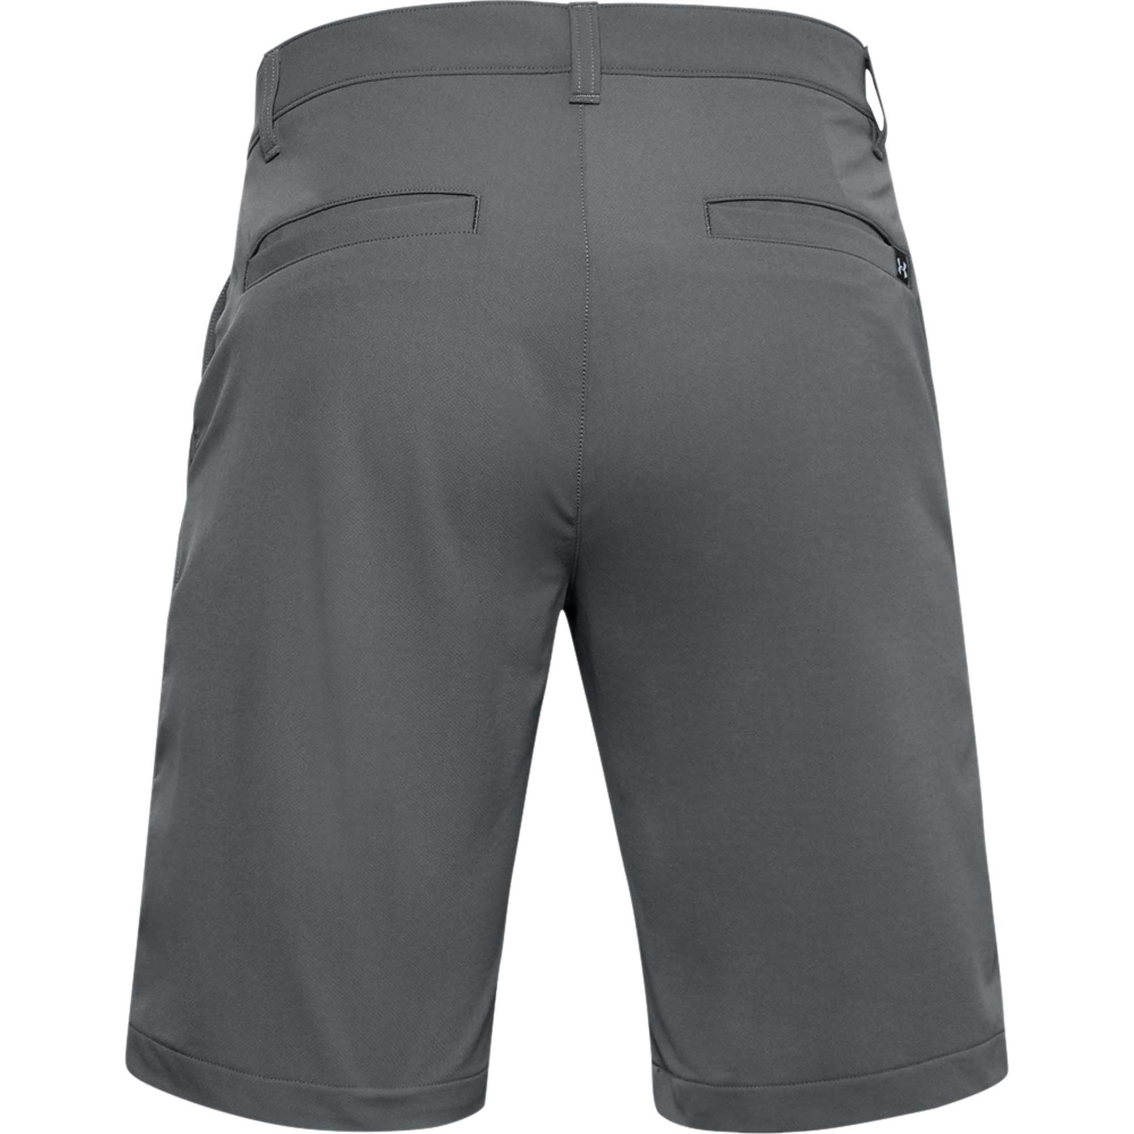 Under Armour 10 in. Tech Shorts - Image 6 of 8